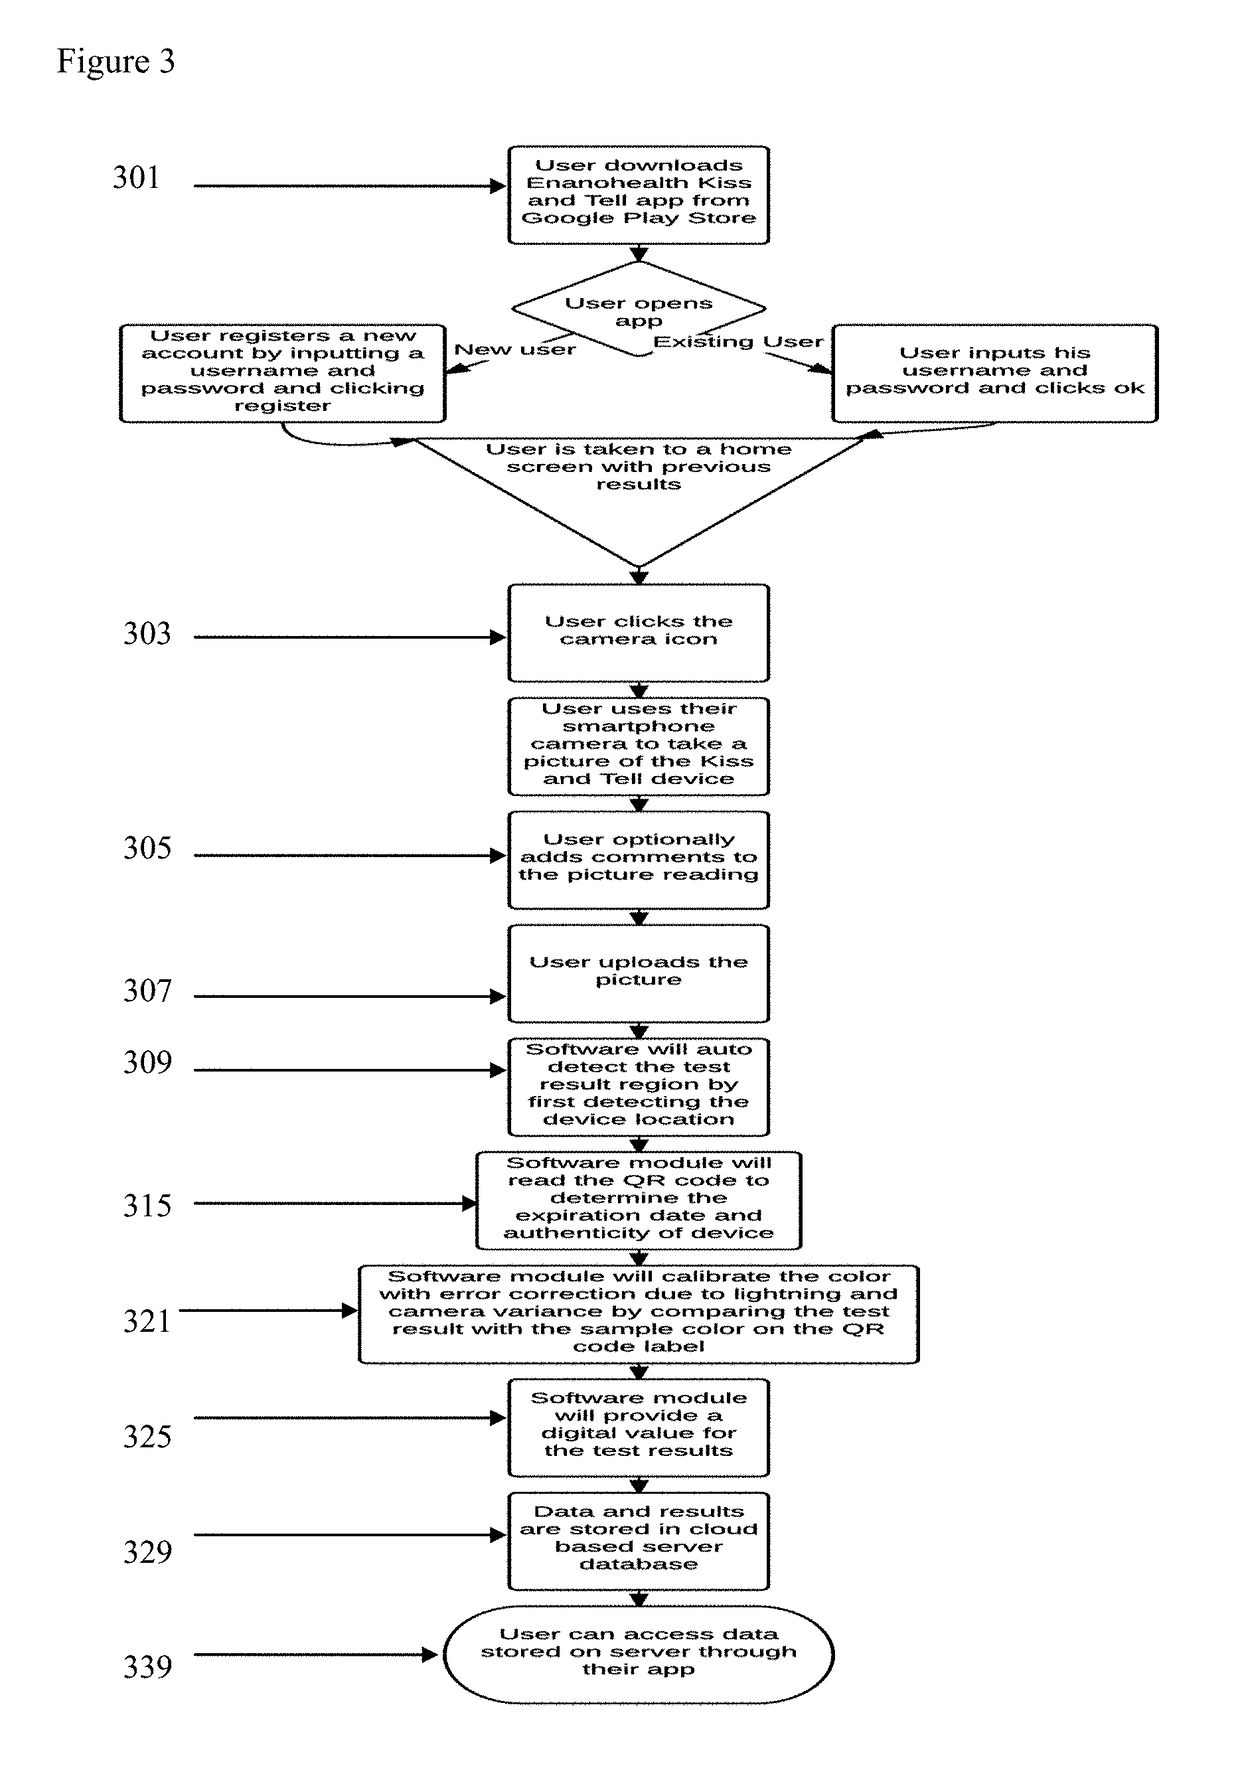 Public personalized mobile health sensing system, method and device